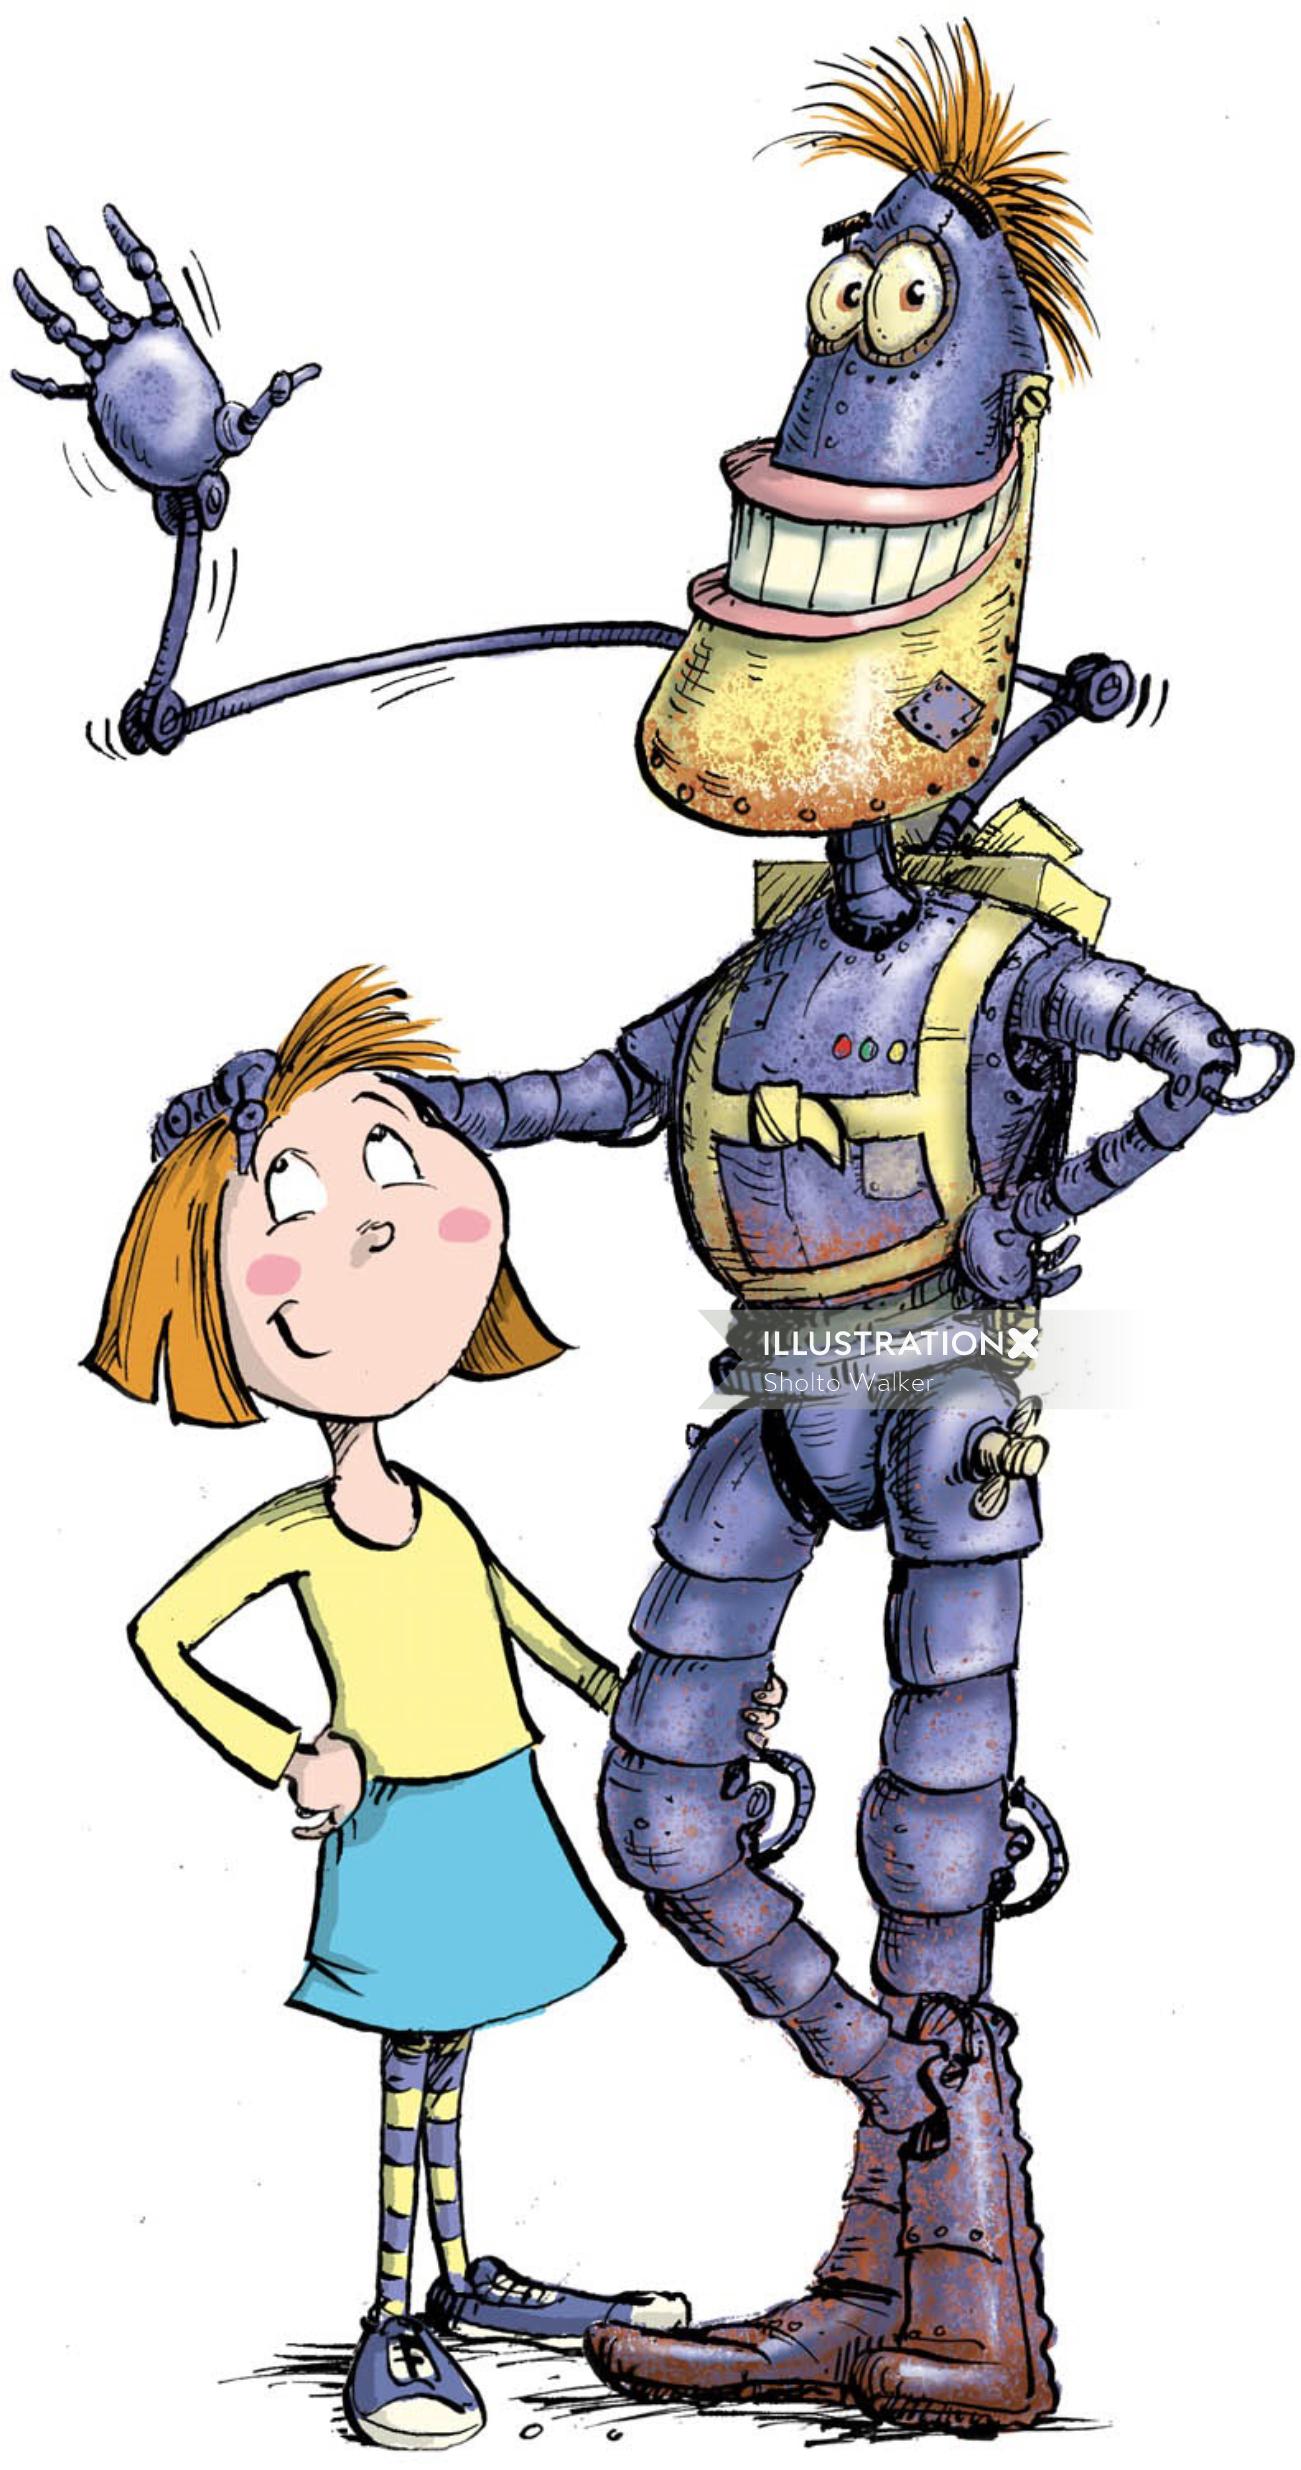 An illustration of robot & young girl standing together